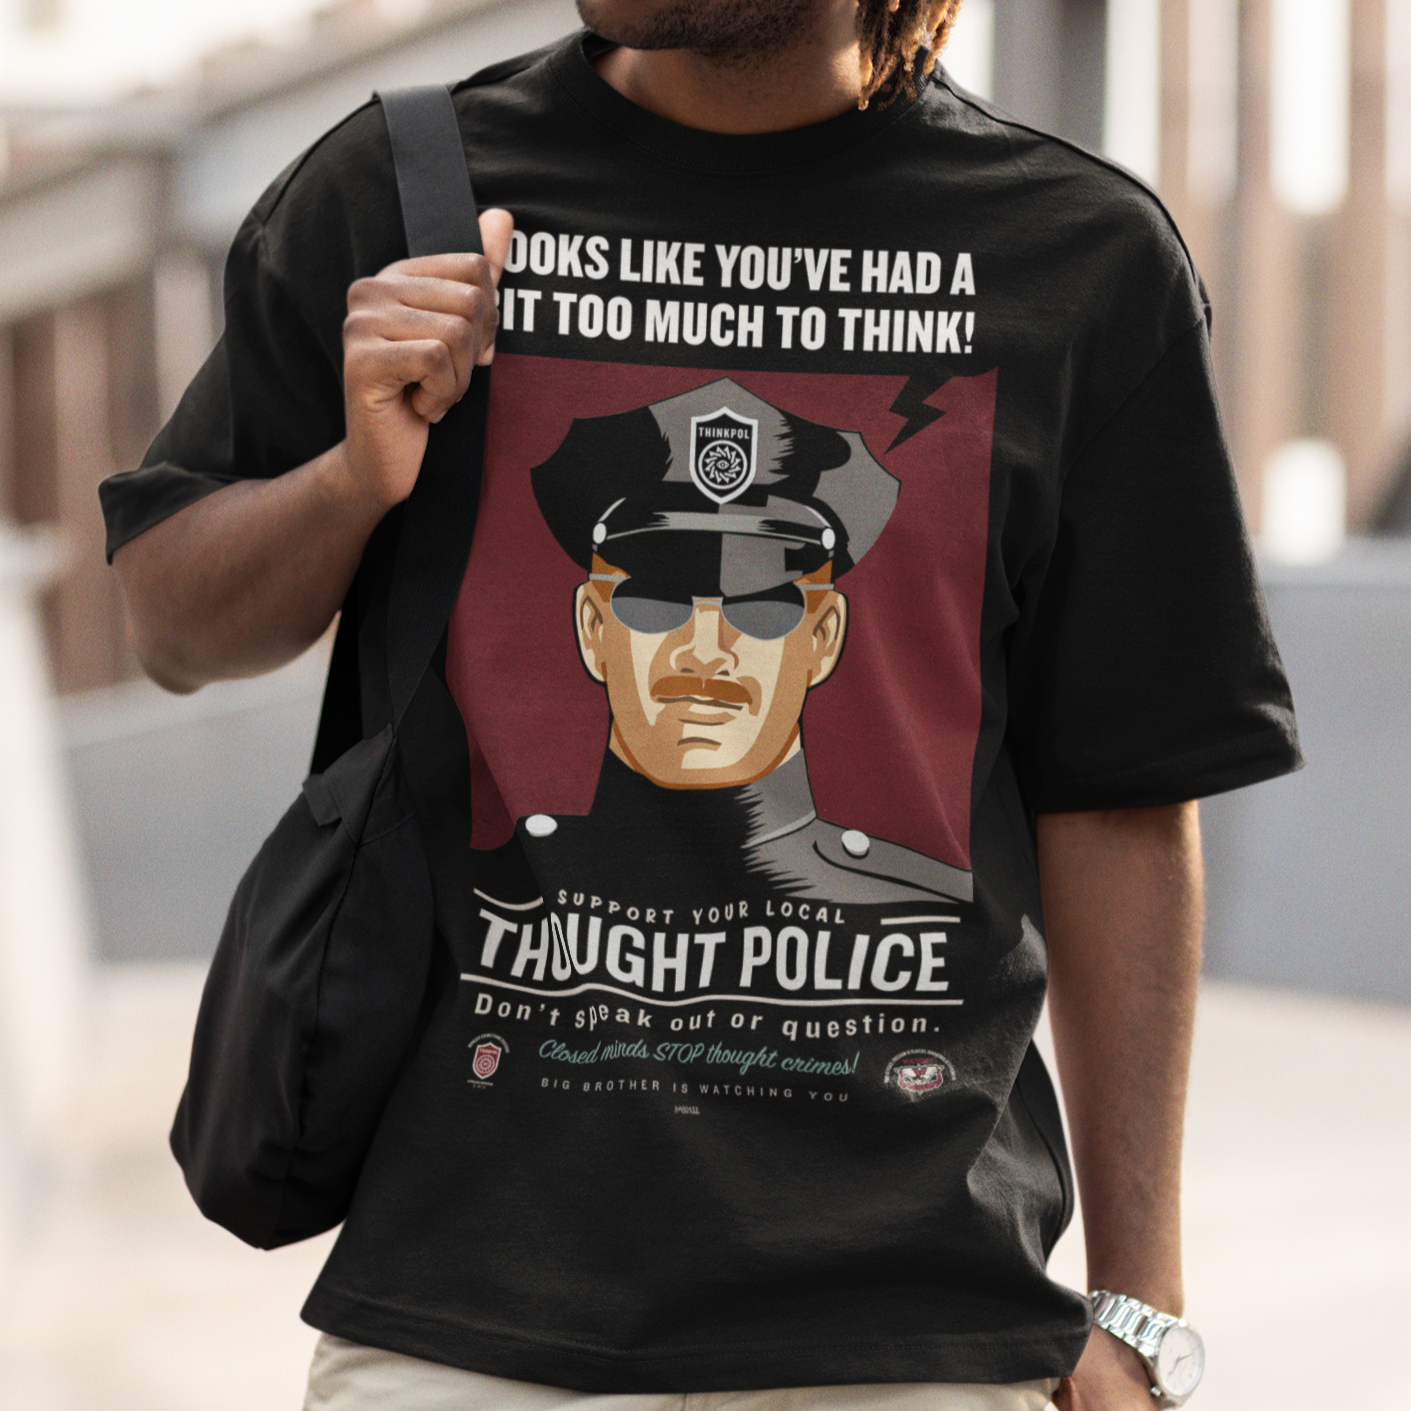 Looks Like You've Had A Bit Too Much To Think Thought Police Garment-Dyed Heavyweight T-Shirt